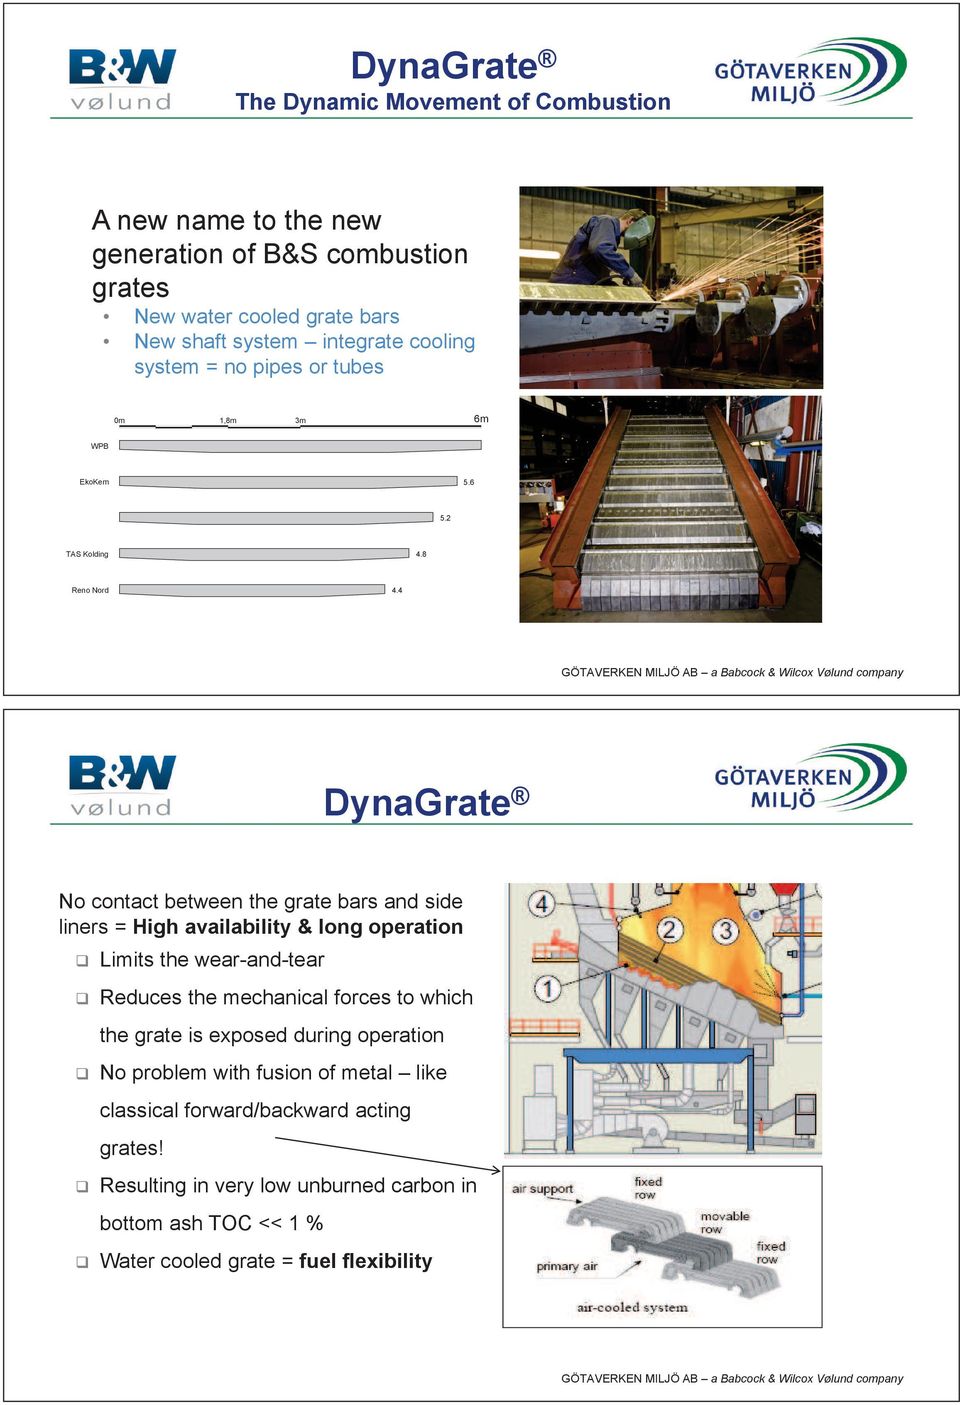 4 DynaGrate No contact between the grate bars and side liners = High availability & long operation Limits the wear-and-tear Reduces the mechanical forces to